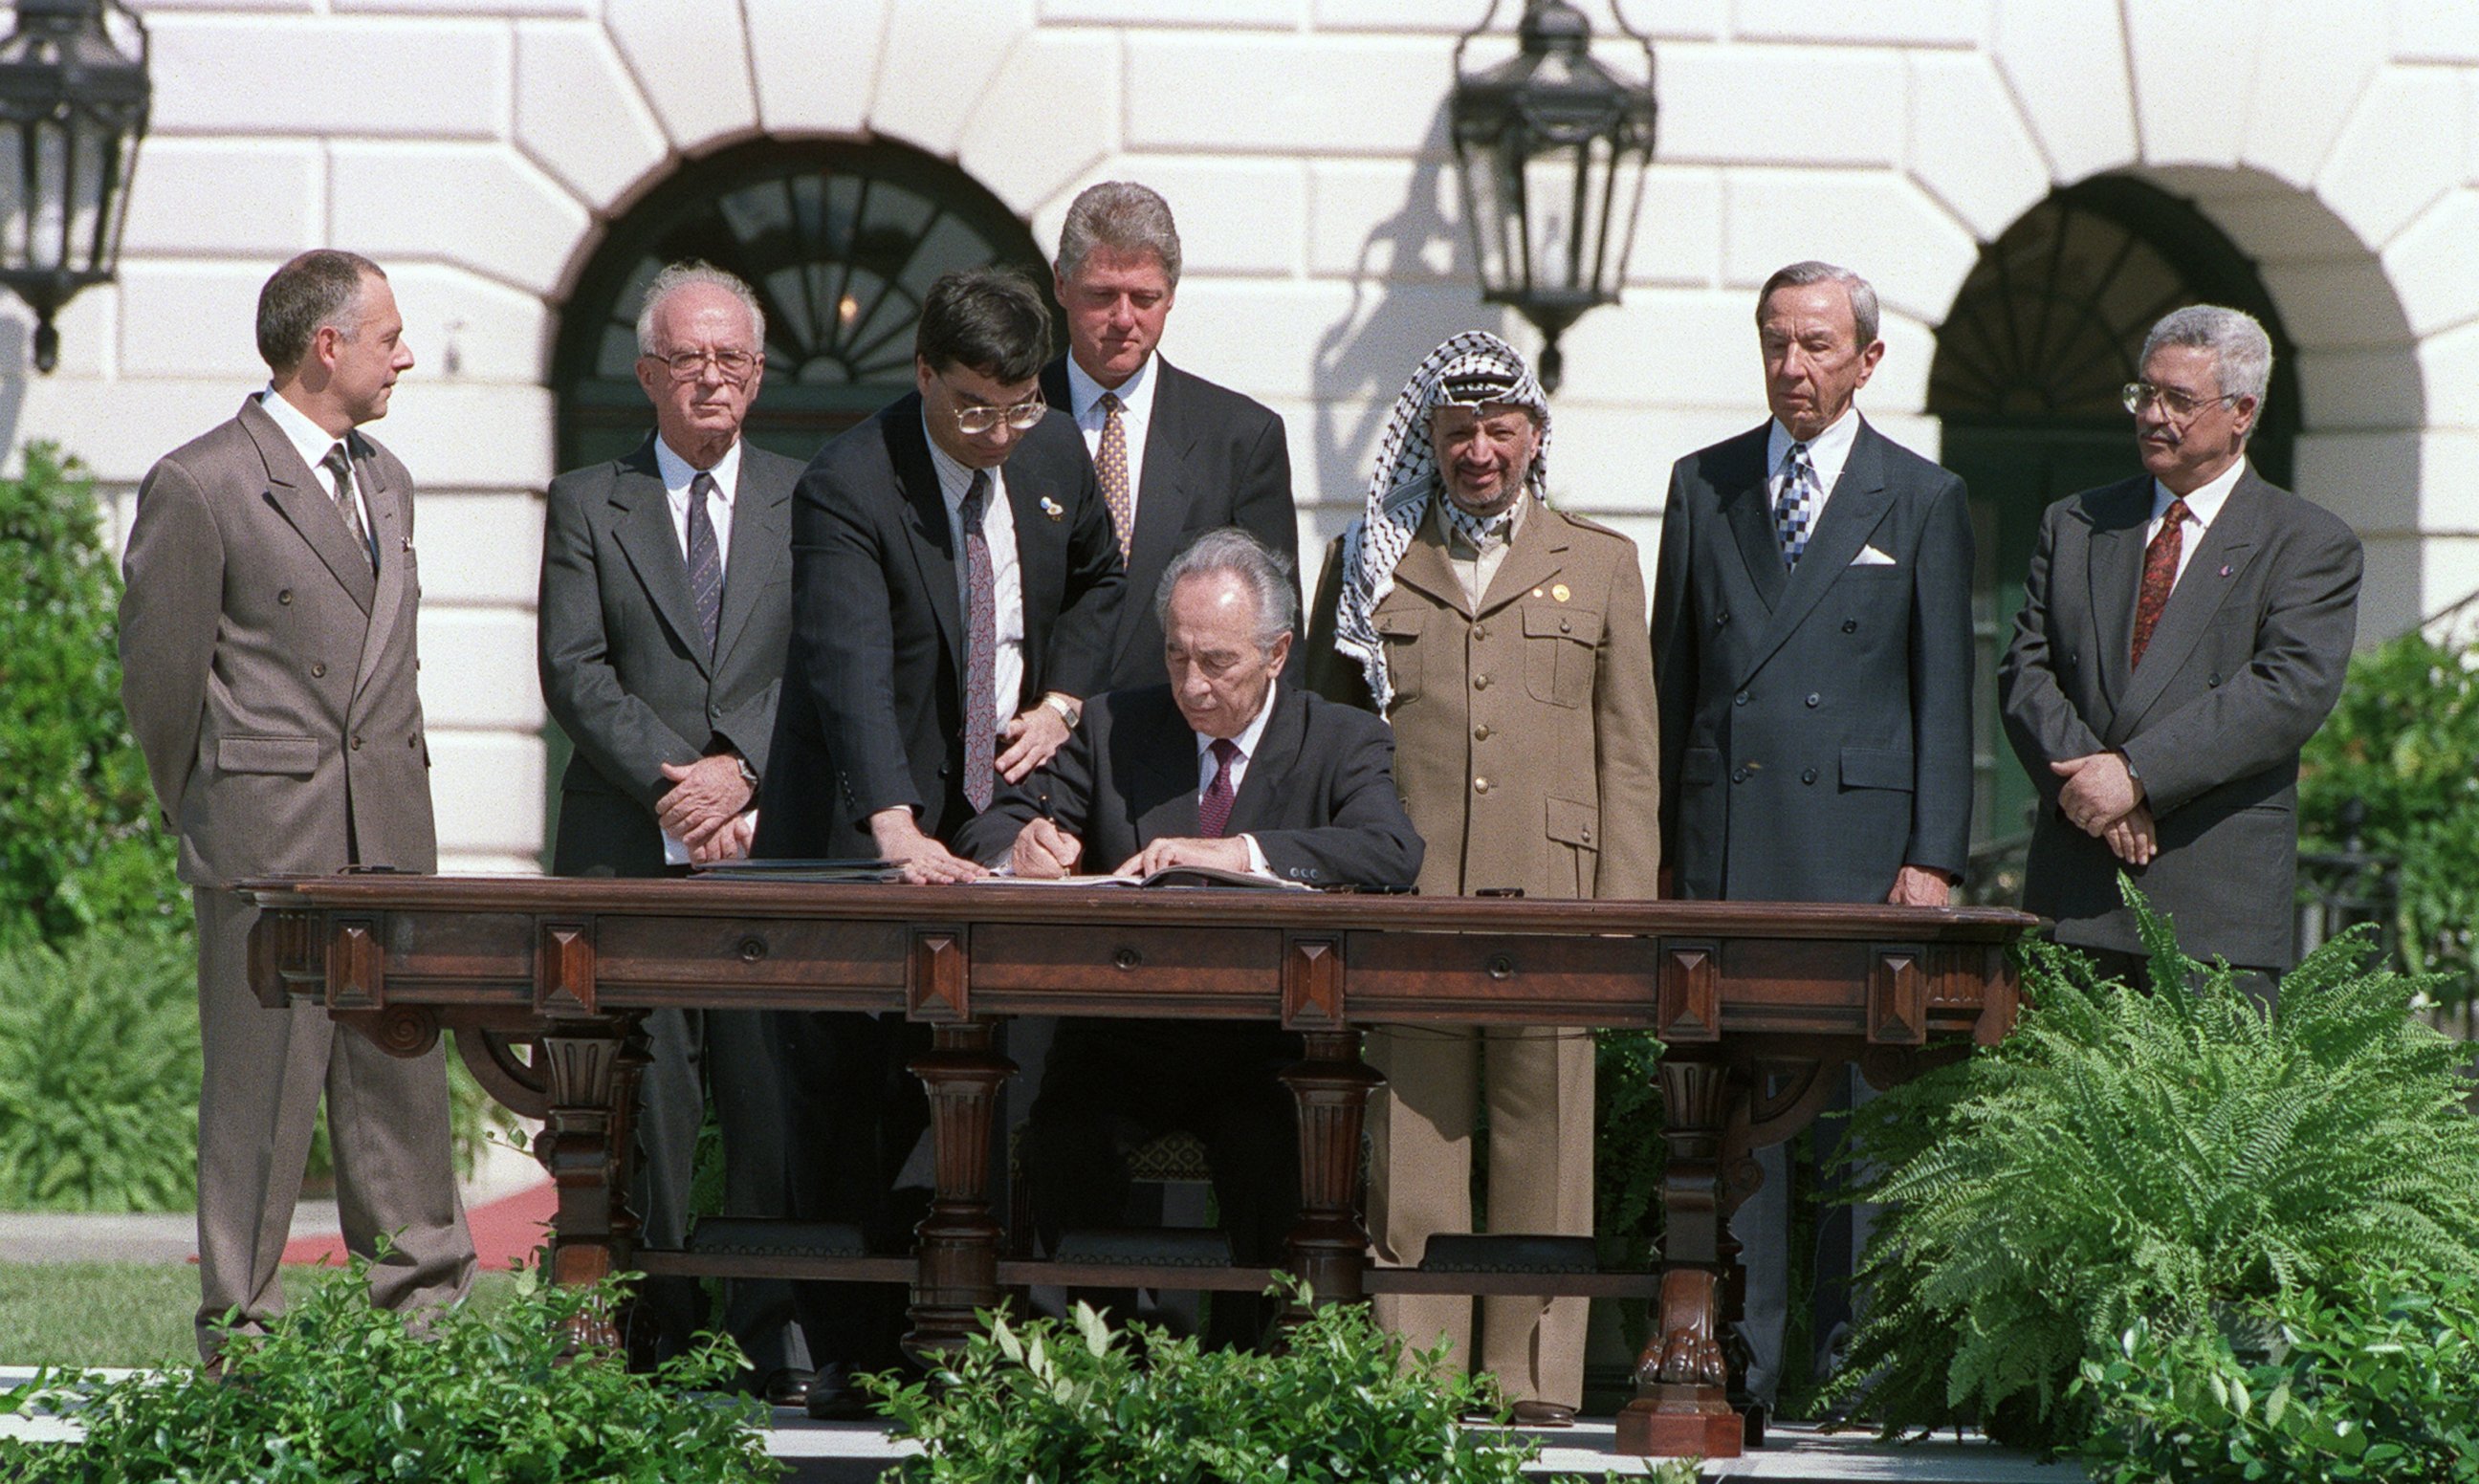 PHOTO: Israeli Foreign Minister Shimon Peres signs the agreement on Palestinian autonomy in the occupied territories on September 13, 1993 during a ceremony at the White House.  This agreement came after months of secret talks in Oslo, Norway.